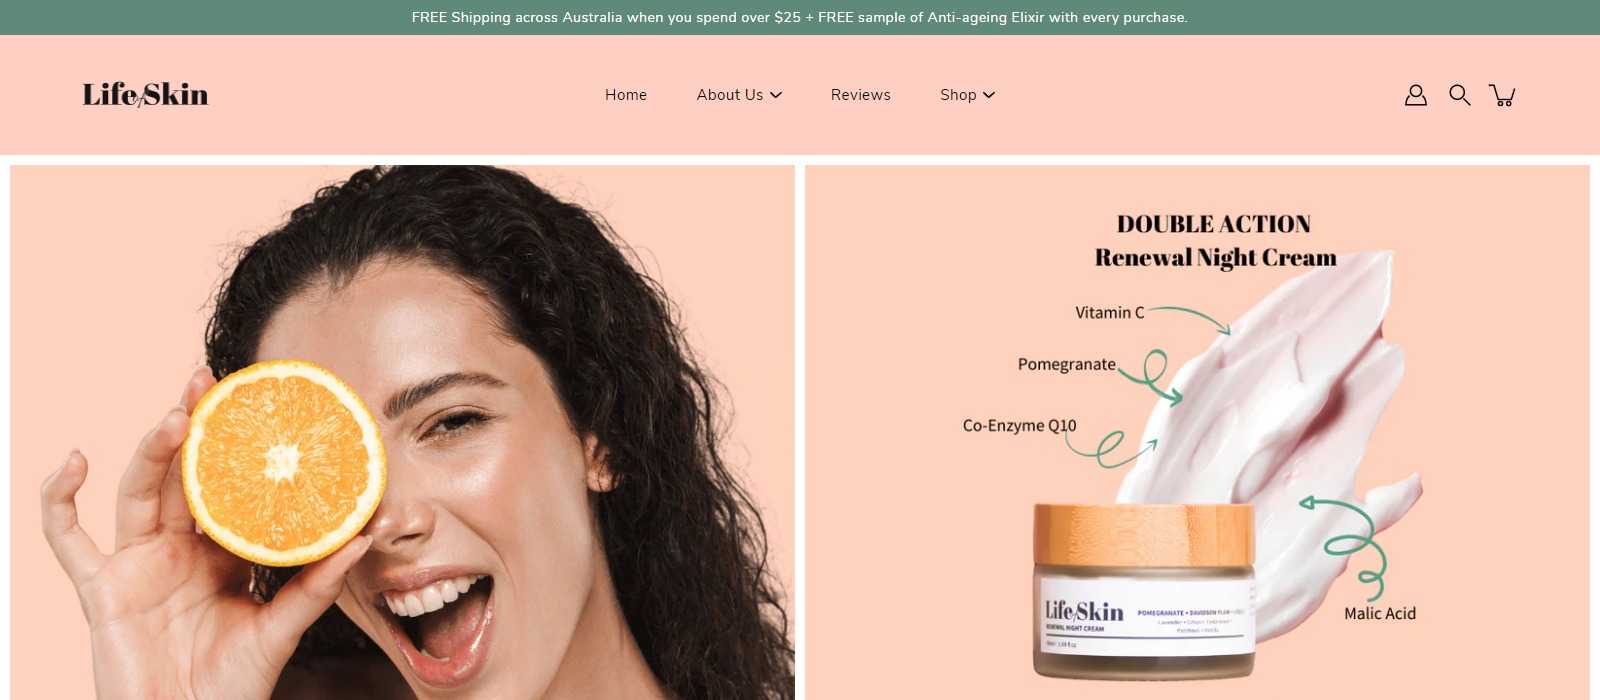 Life of Skin Affiliates Program Review: Earn Up To 10% Commission on Each sale